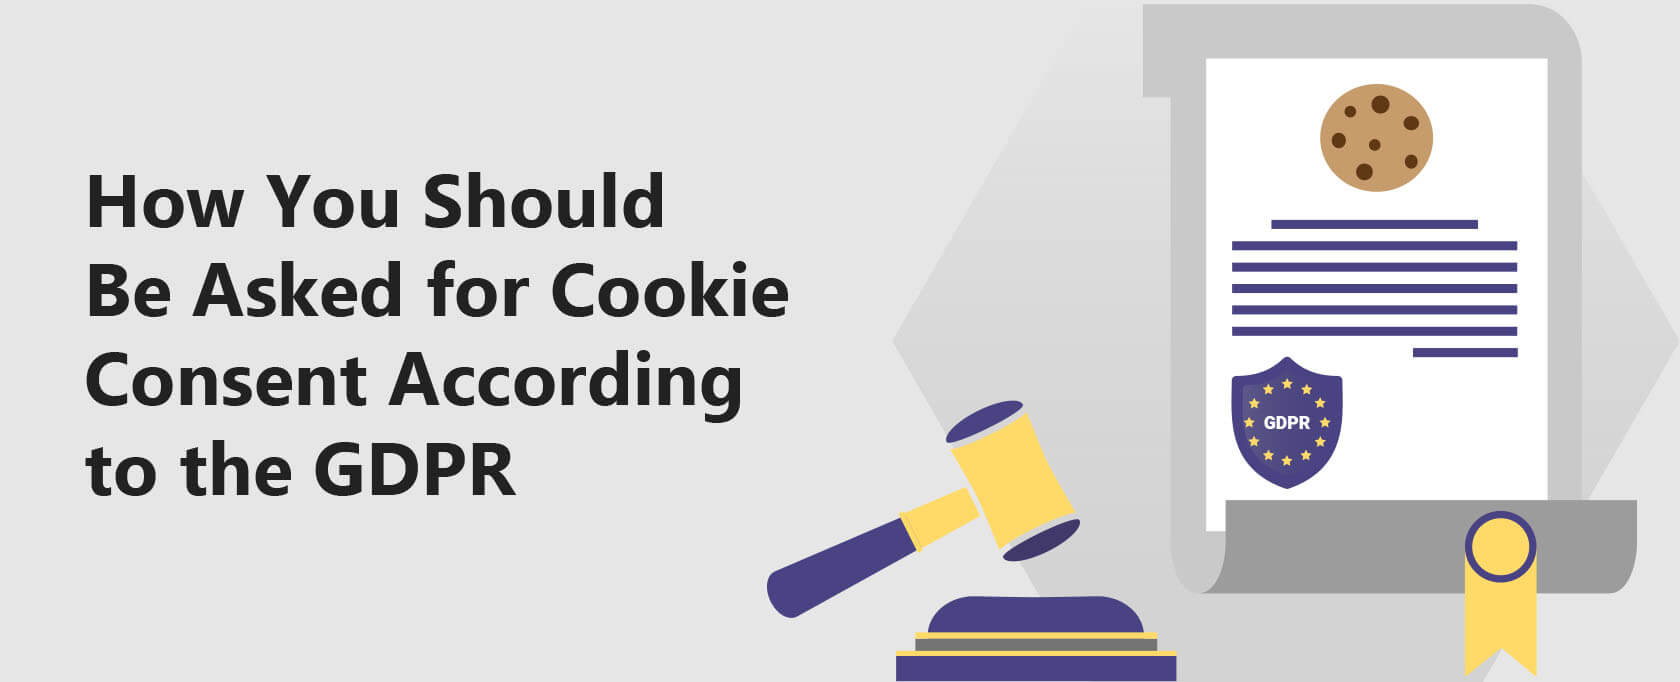 How to Ask for Cookie Consent